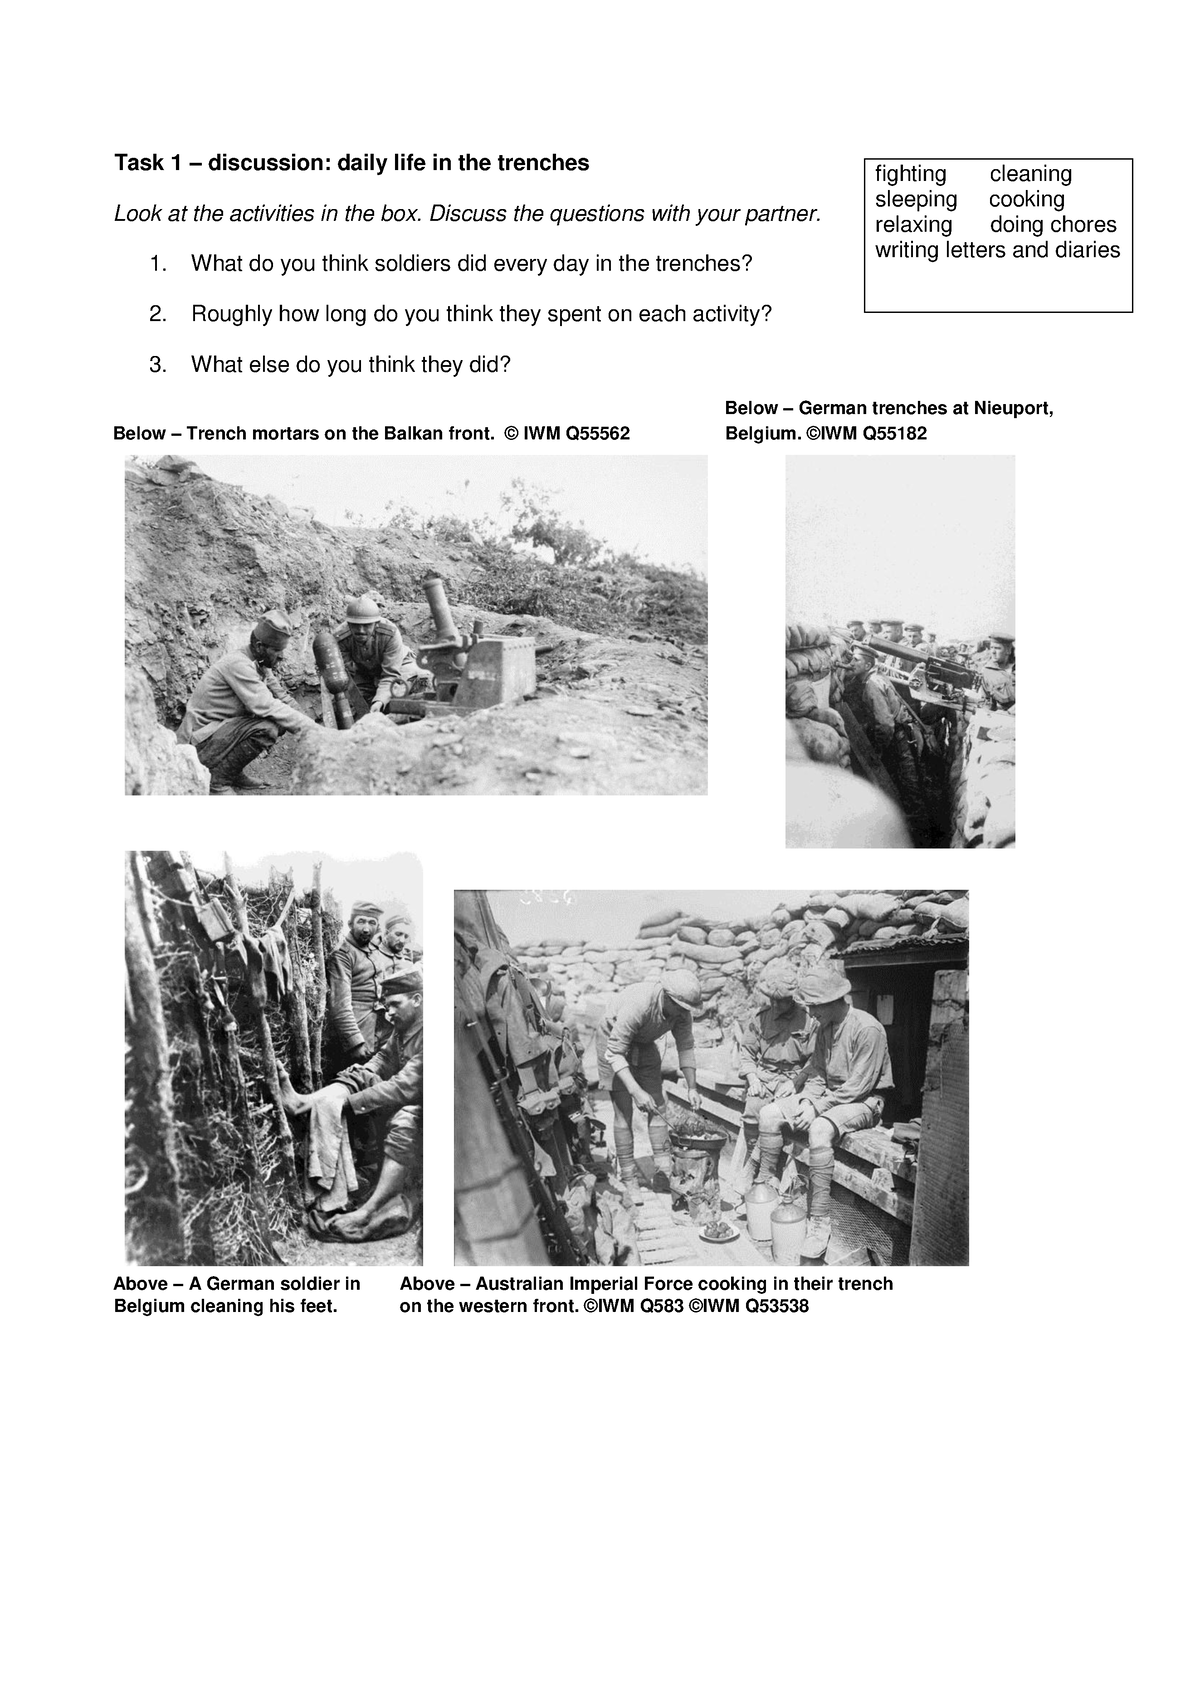 a-day-in-the-trenches-student-worksheet-mod-task-1-discussion-daily-life-in-the-trenches